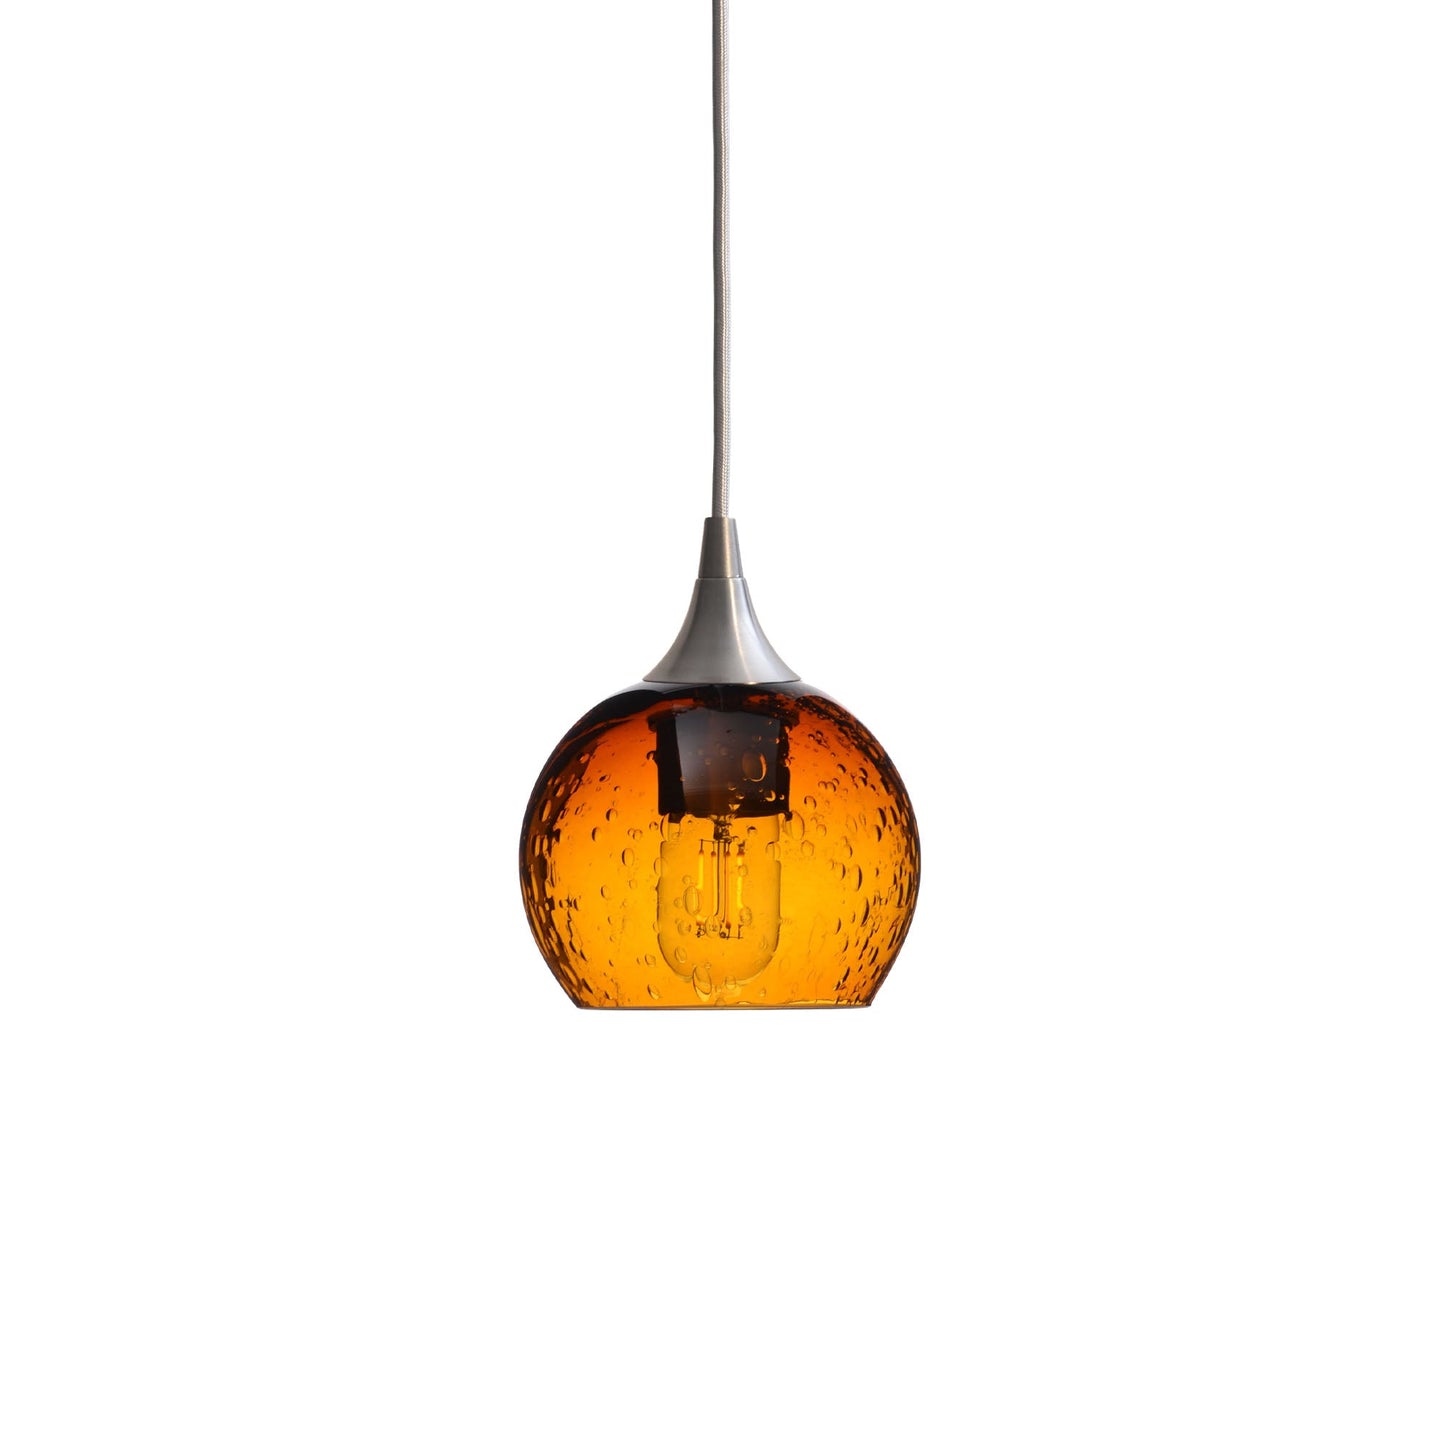 763 Lunar: Single Pendant Light-Glass-Bicycle Glass Co - Hotshop-Harvest Gold-Brushed Nickel-Bicycle Glass Co